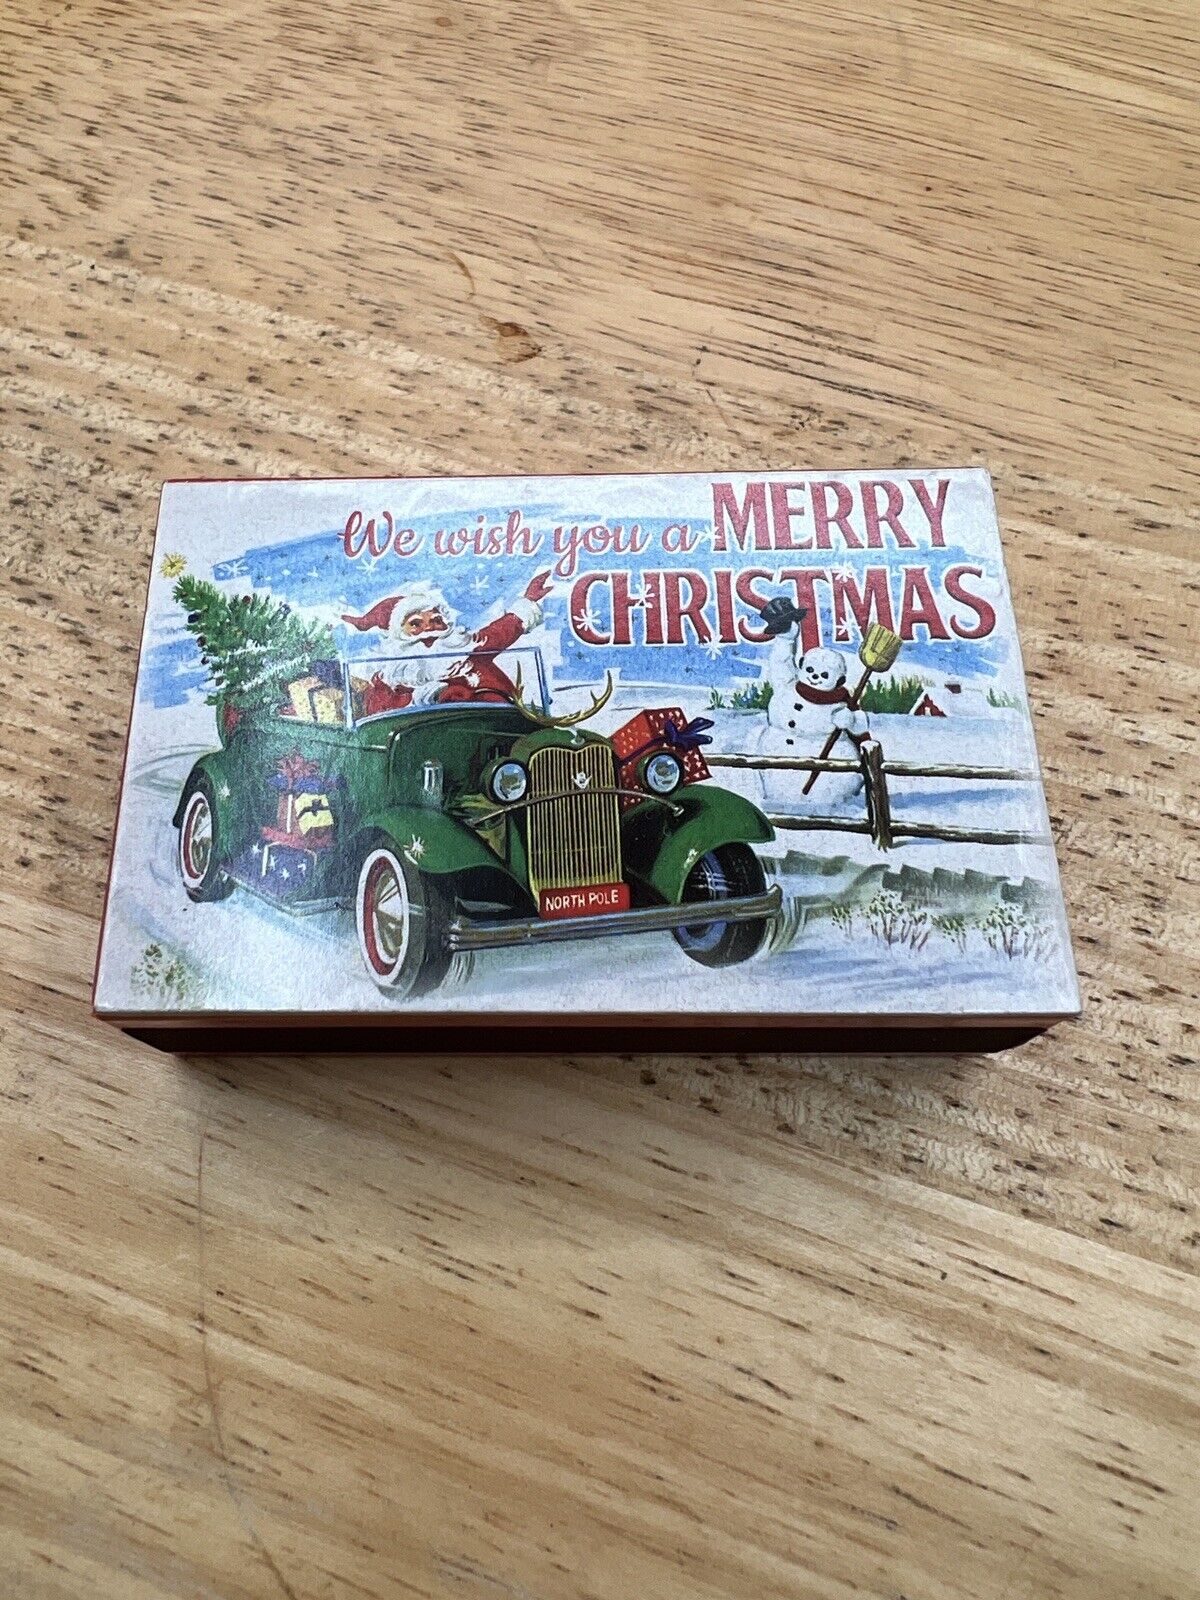 VINTAGE Merry Christmas MUSIC BOX WITH ANIMATED SCENE